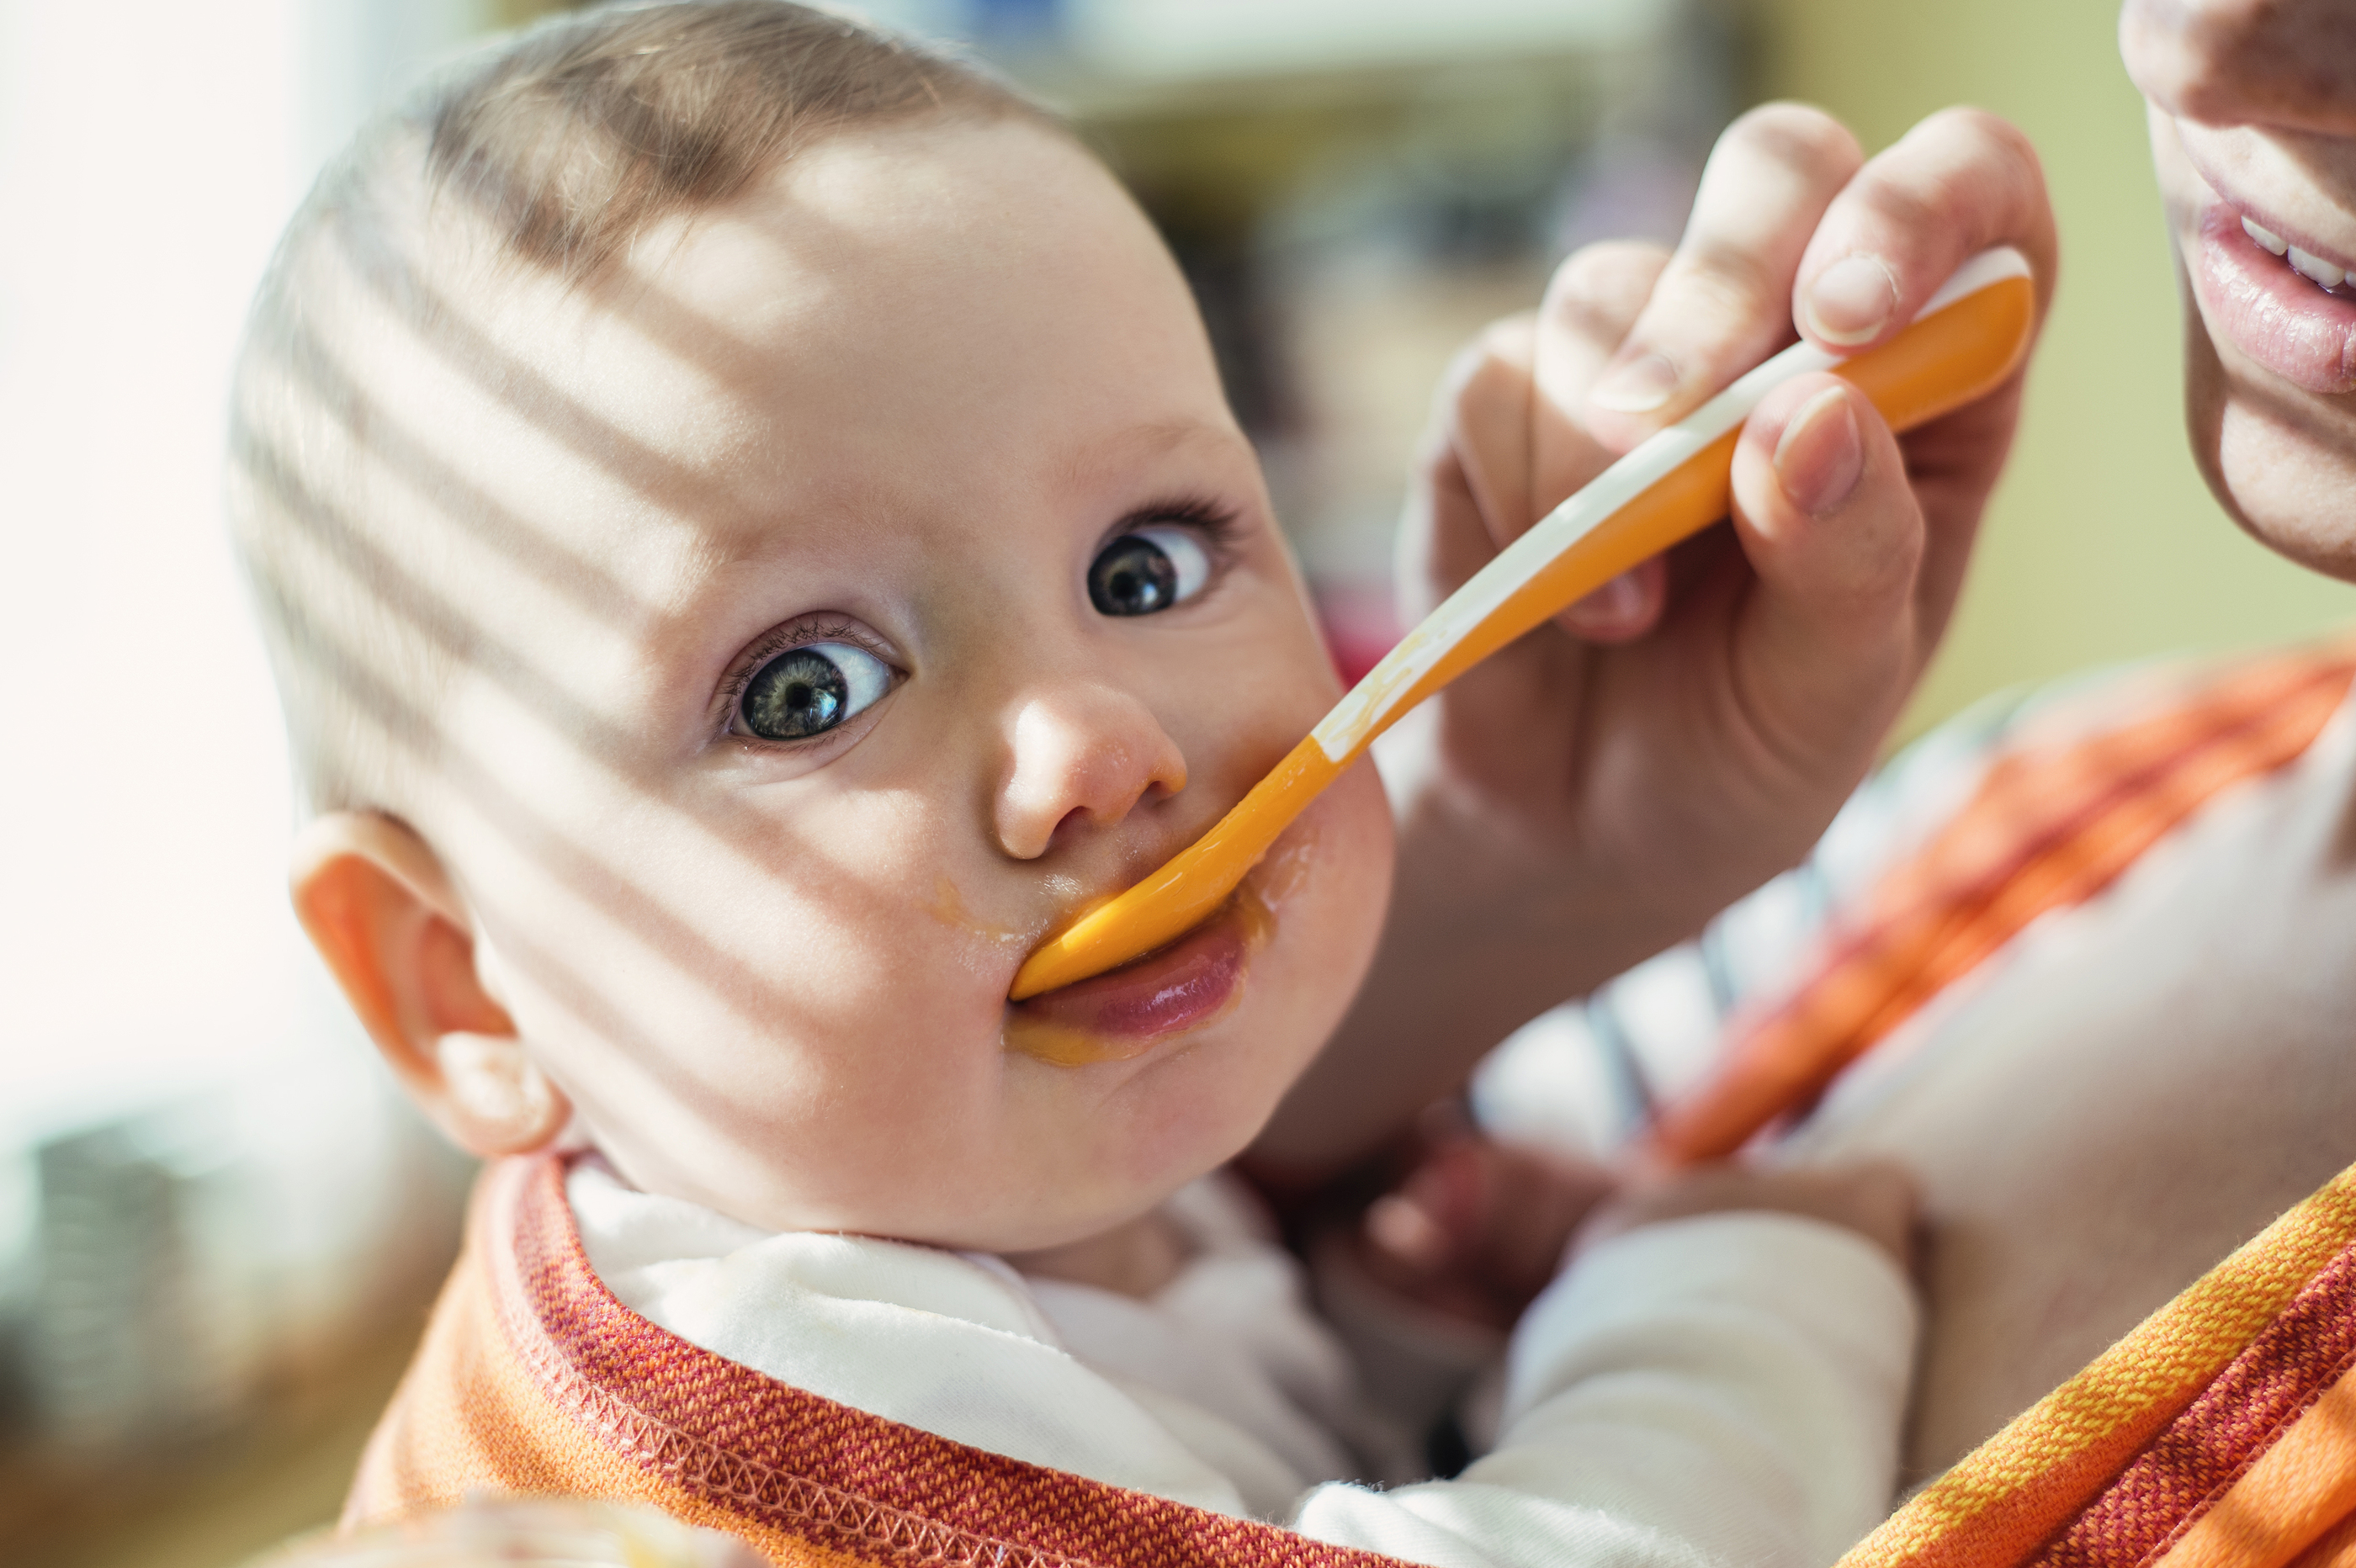 Is my baby eating too much solid foods? — Feed Eat Speak - Stacey